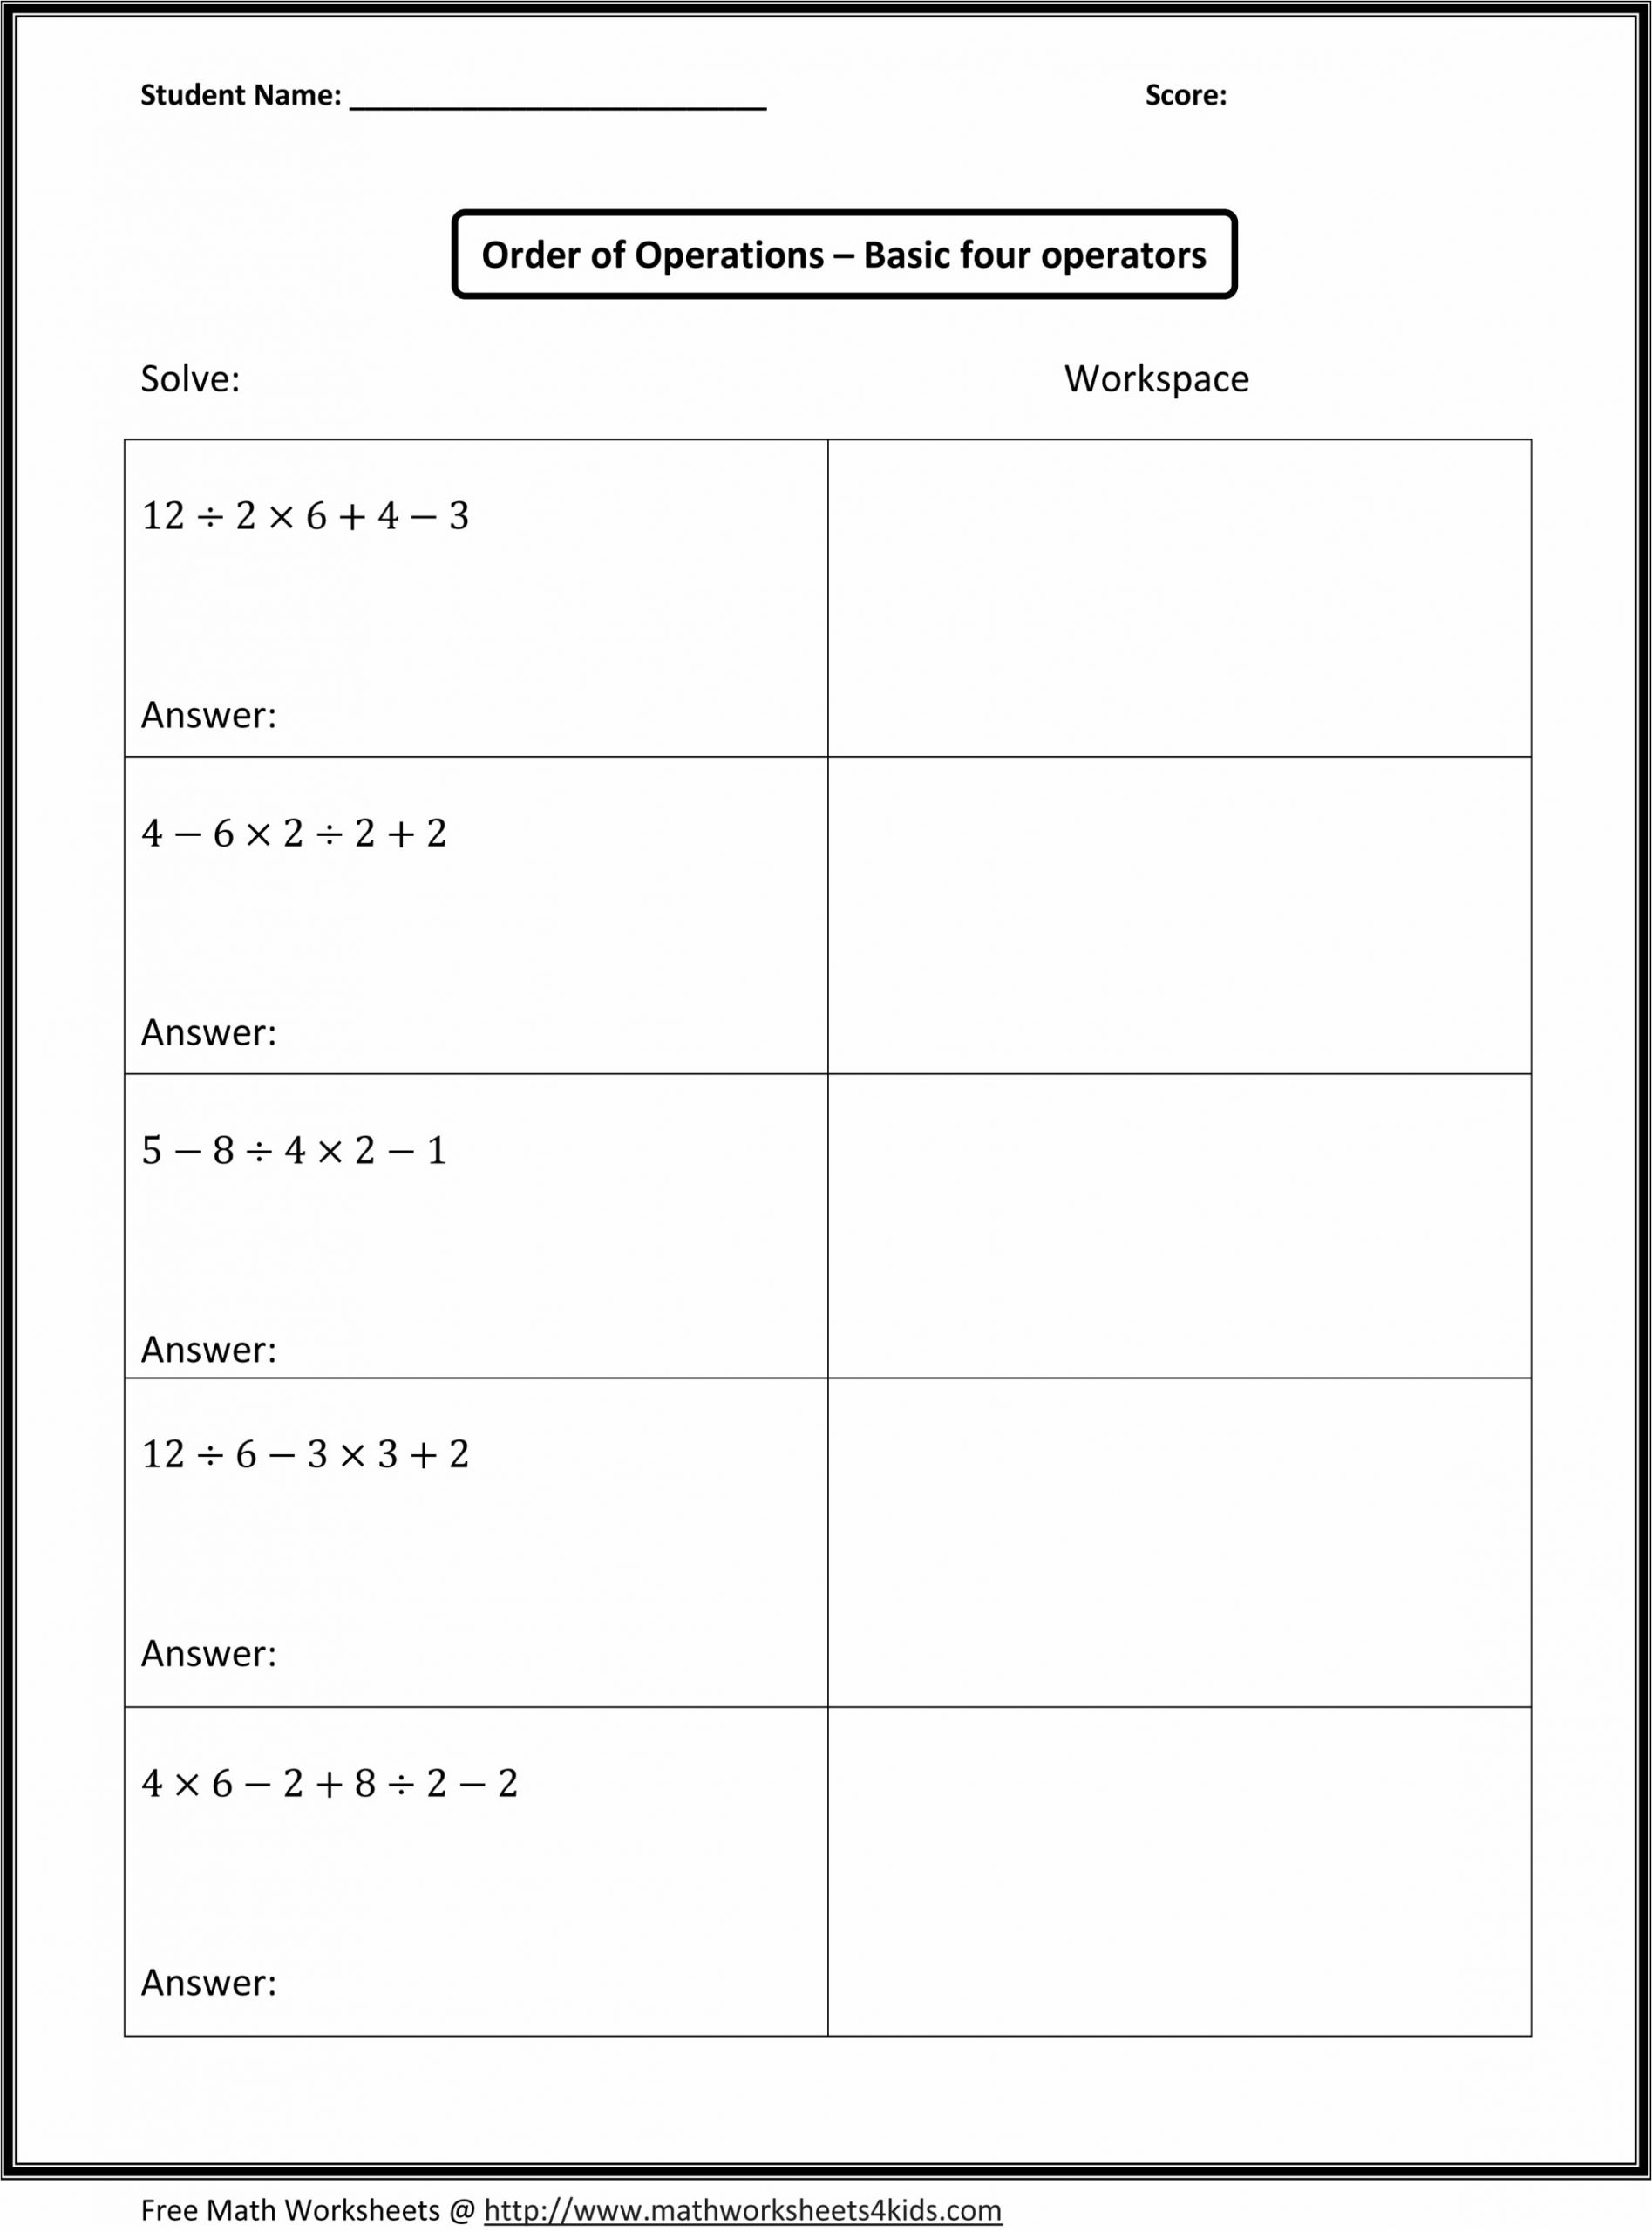 36 associative property of additioneets math properties pdf and multiplication addition worksheets 3rd grade worksheet 5 identity associative property of additioneets math properties pdf and